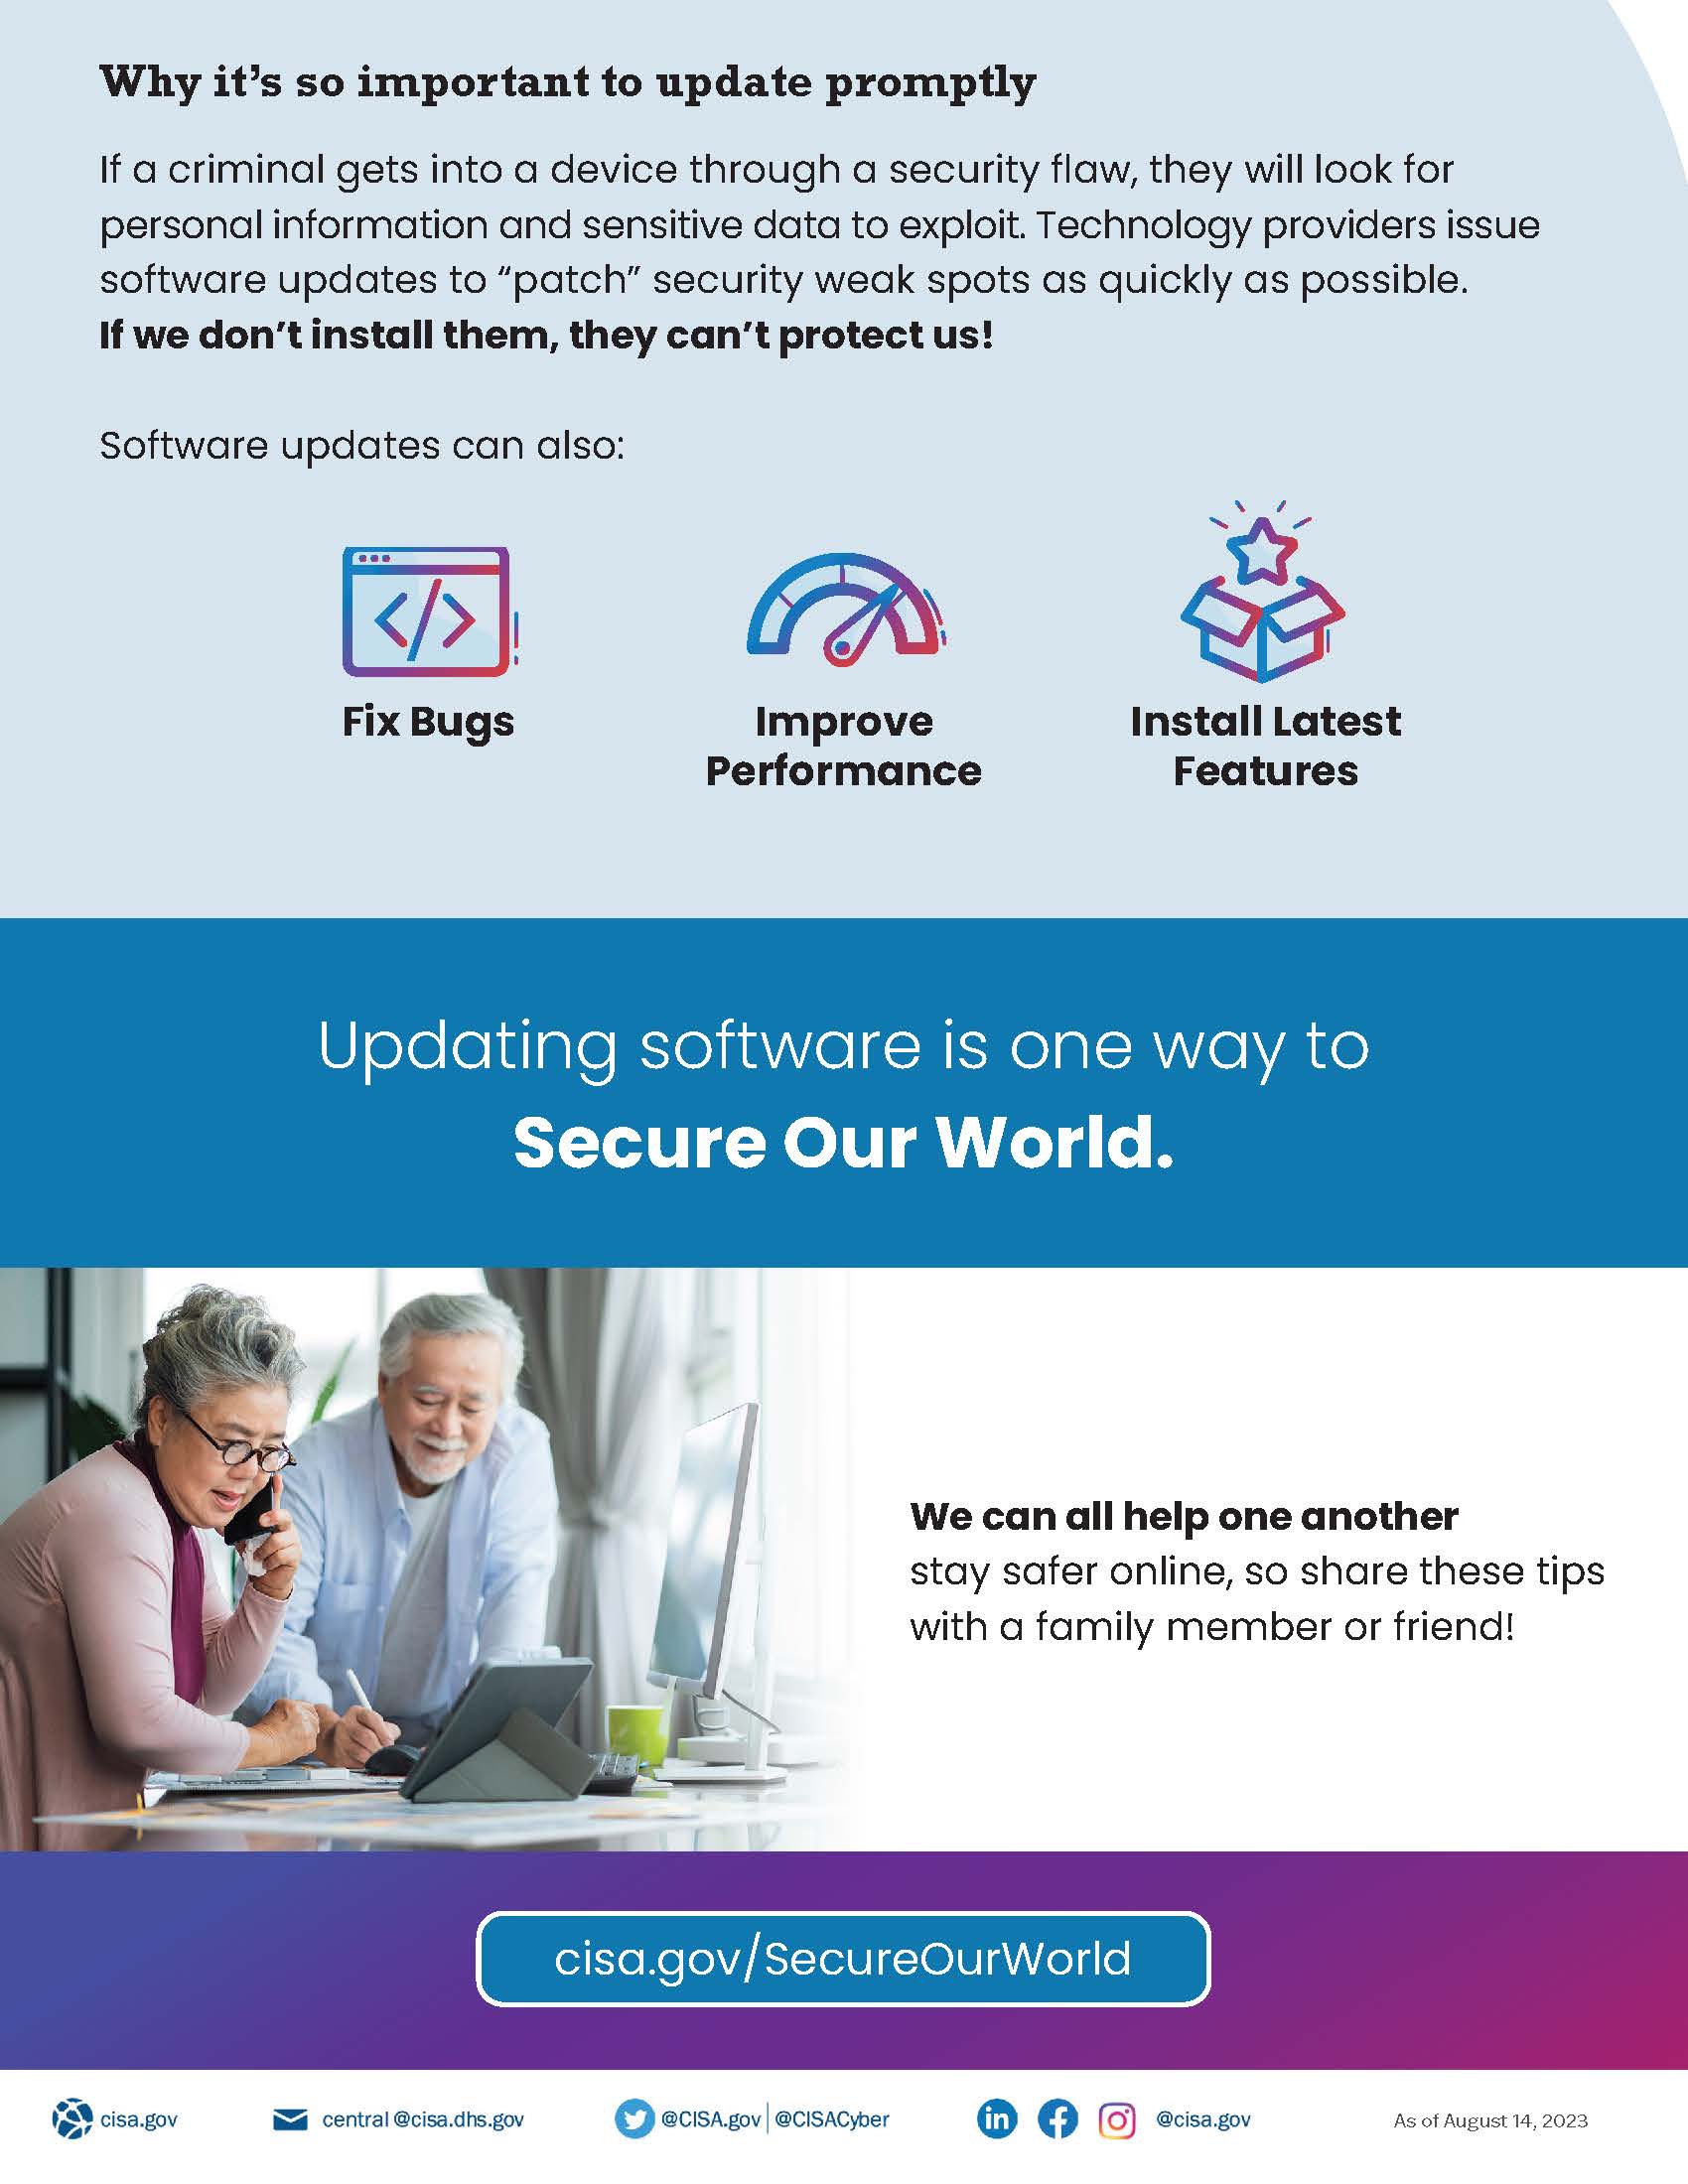 Secure-Our-World-Software-Updates-Tip-Sheet_Page_2